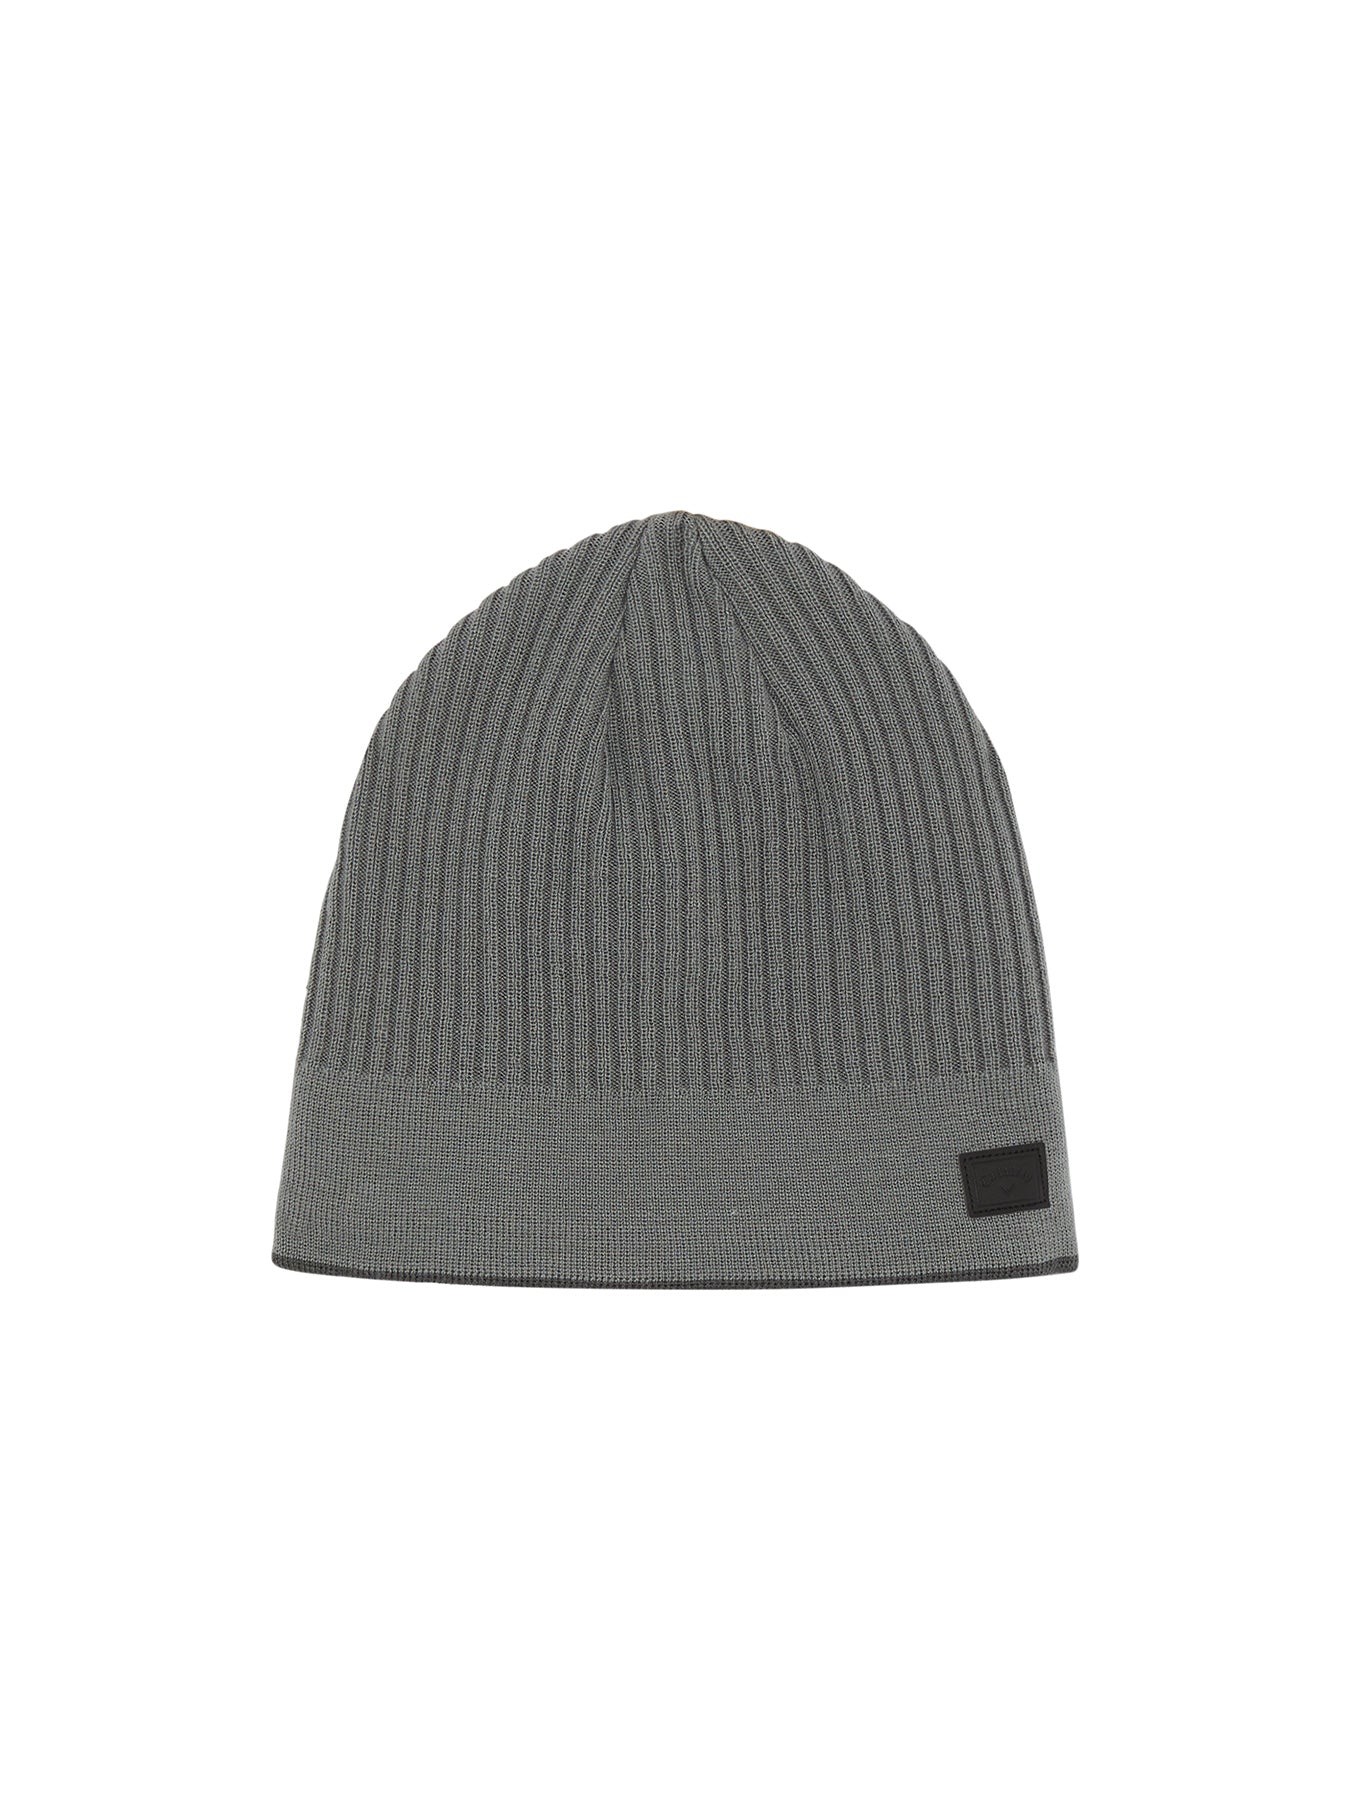 View Winter Rules Beanie In Light Grey information